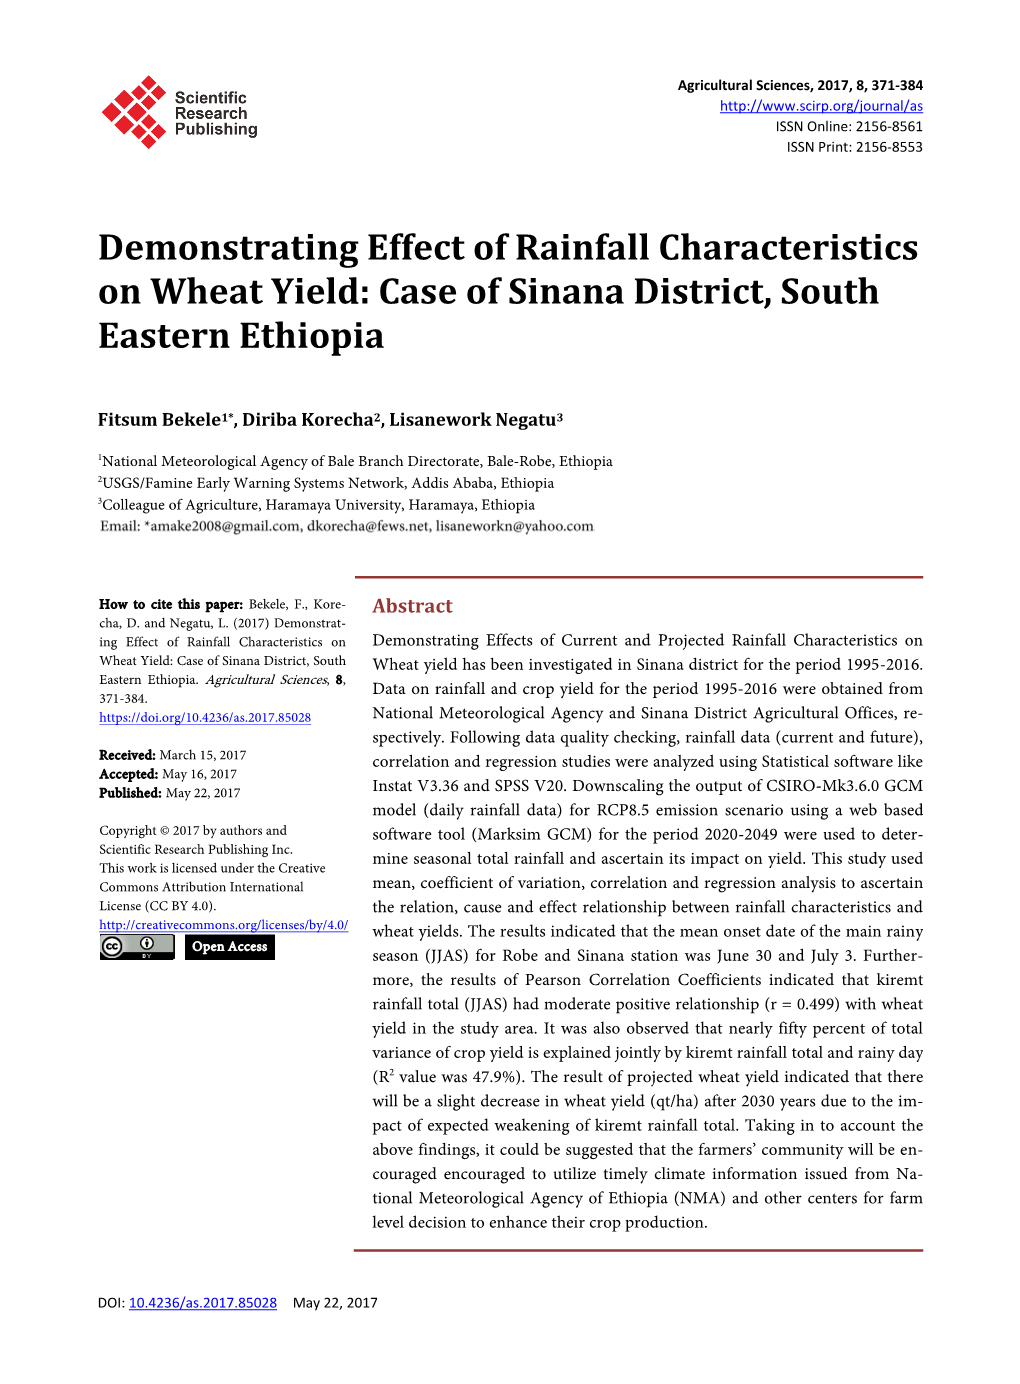 Demonstrating Effect of Rainfall Characteristics on Wheat Yield: Case of Sinana District, South Eastern Ethiopia